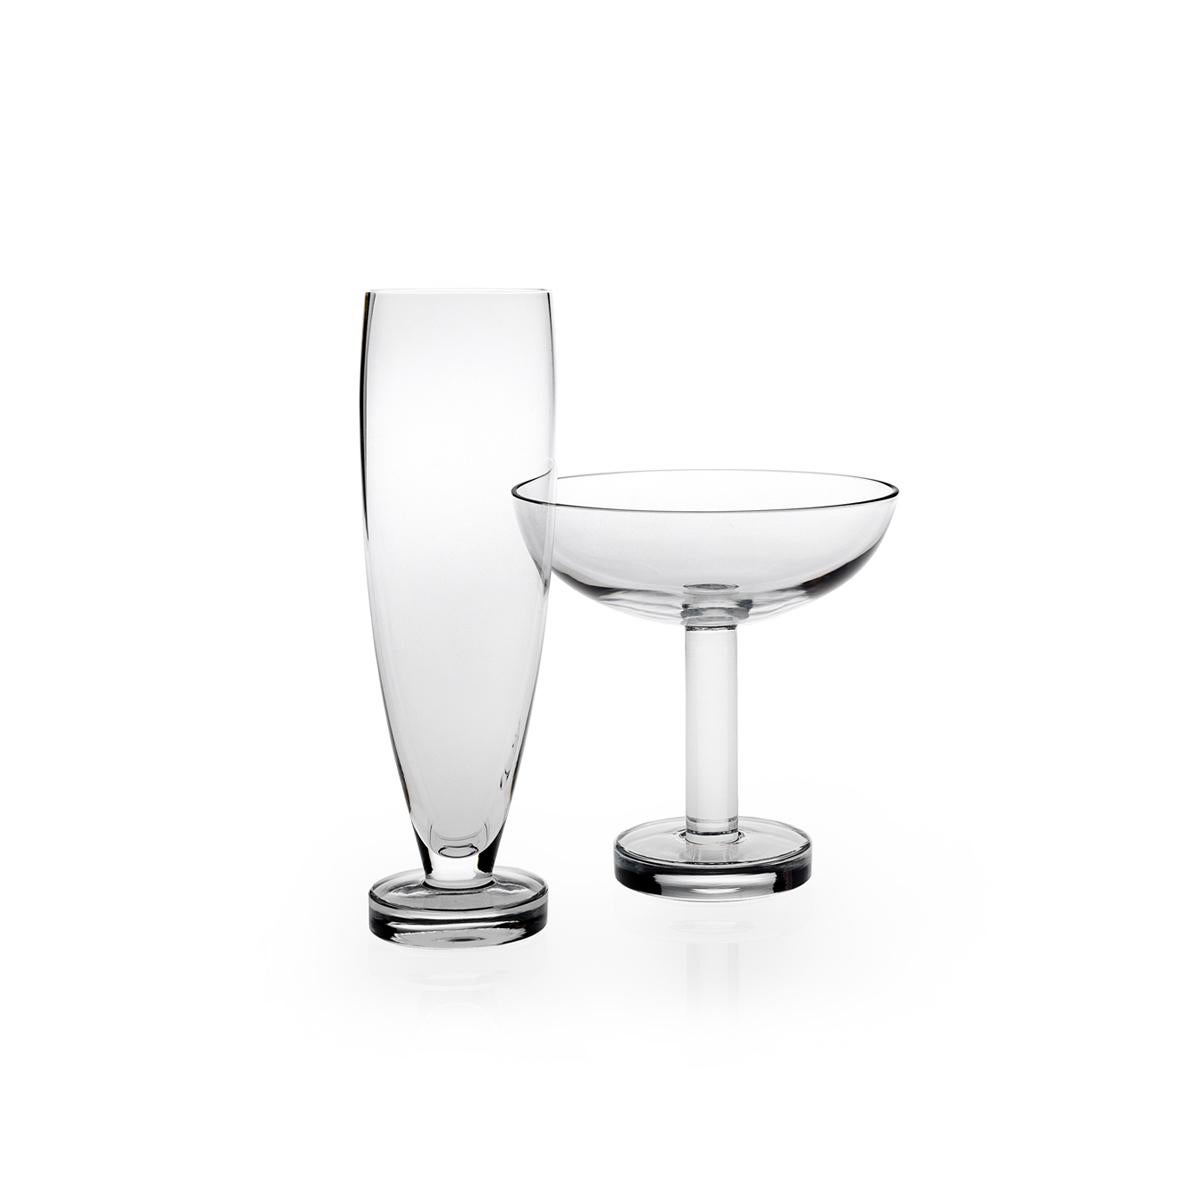 Champagne flute made in blown in a mold glass. The Tulip collection is a glassware family by Aldo Cibic, who designed these pieces walking the line between classical and postmodern design. The boldly simple geometric forms are at once contemporary